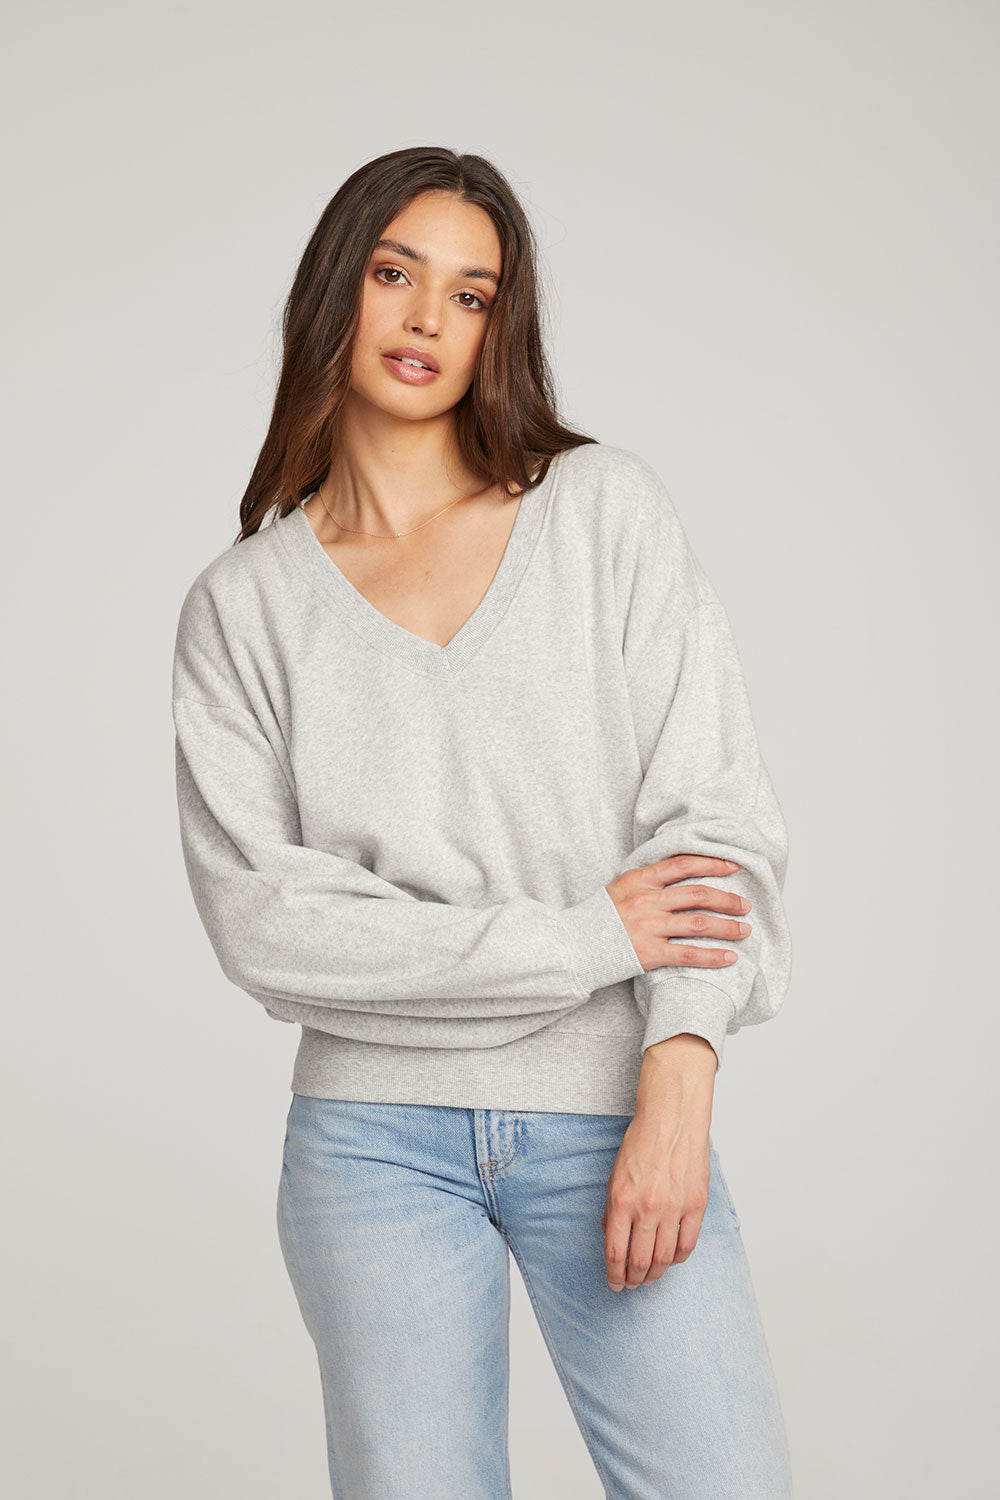 Poppy heather Grey Pullover WOMENS chaserbrand